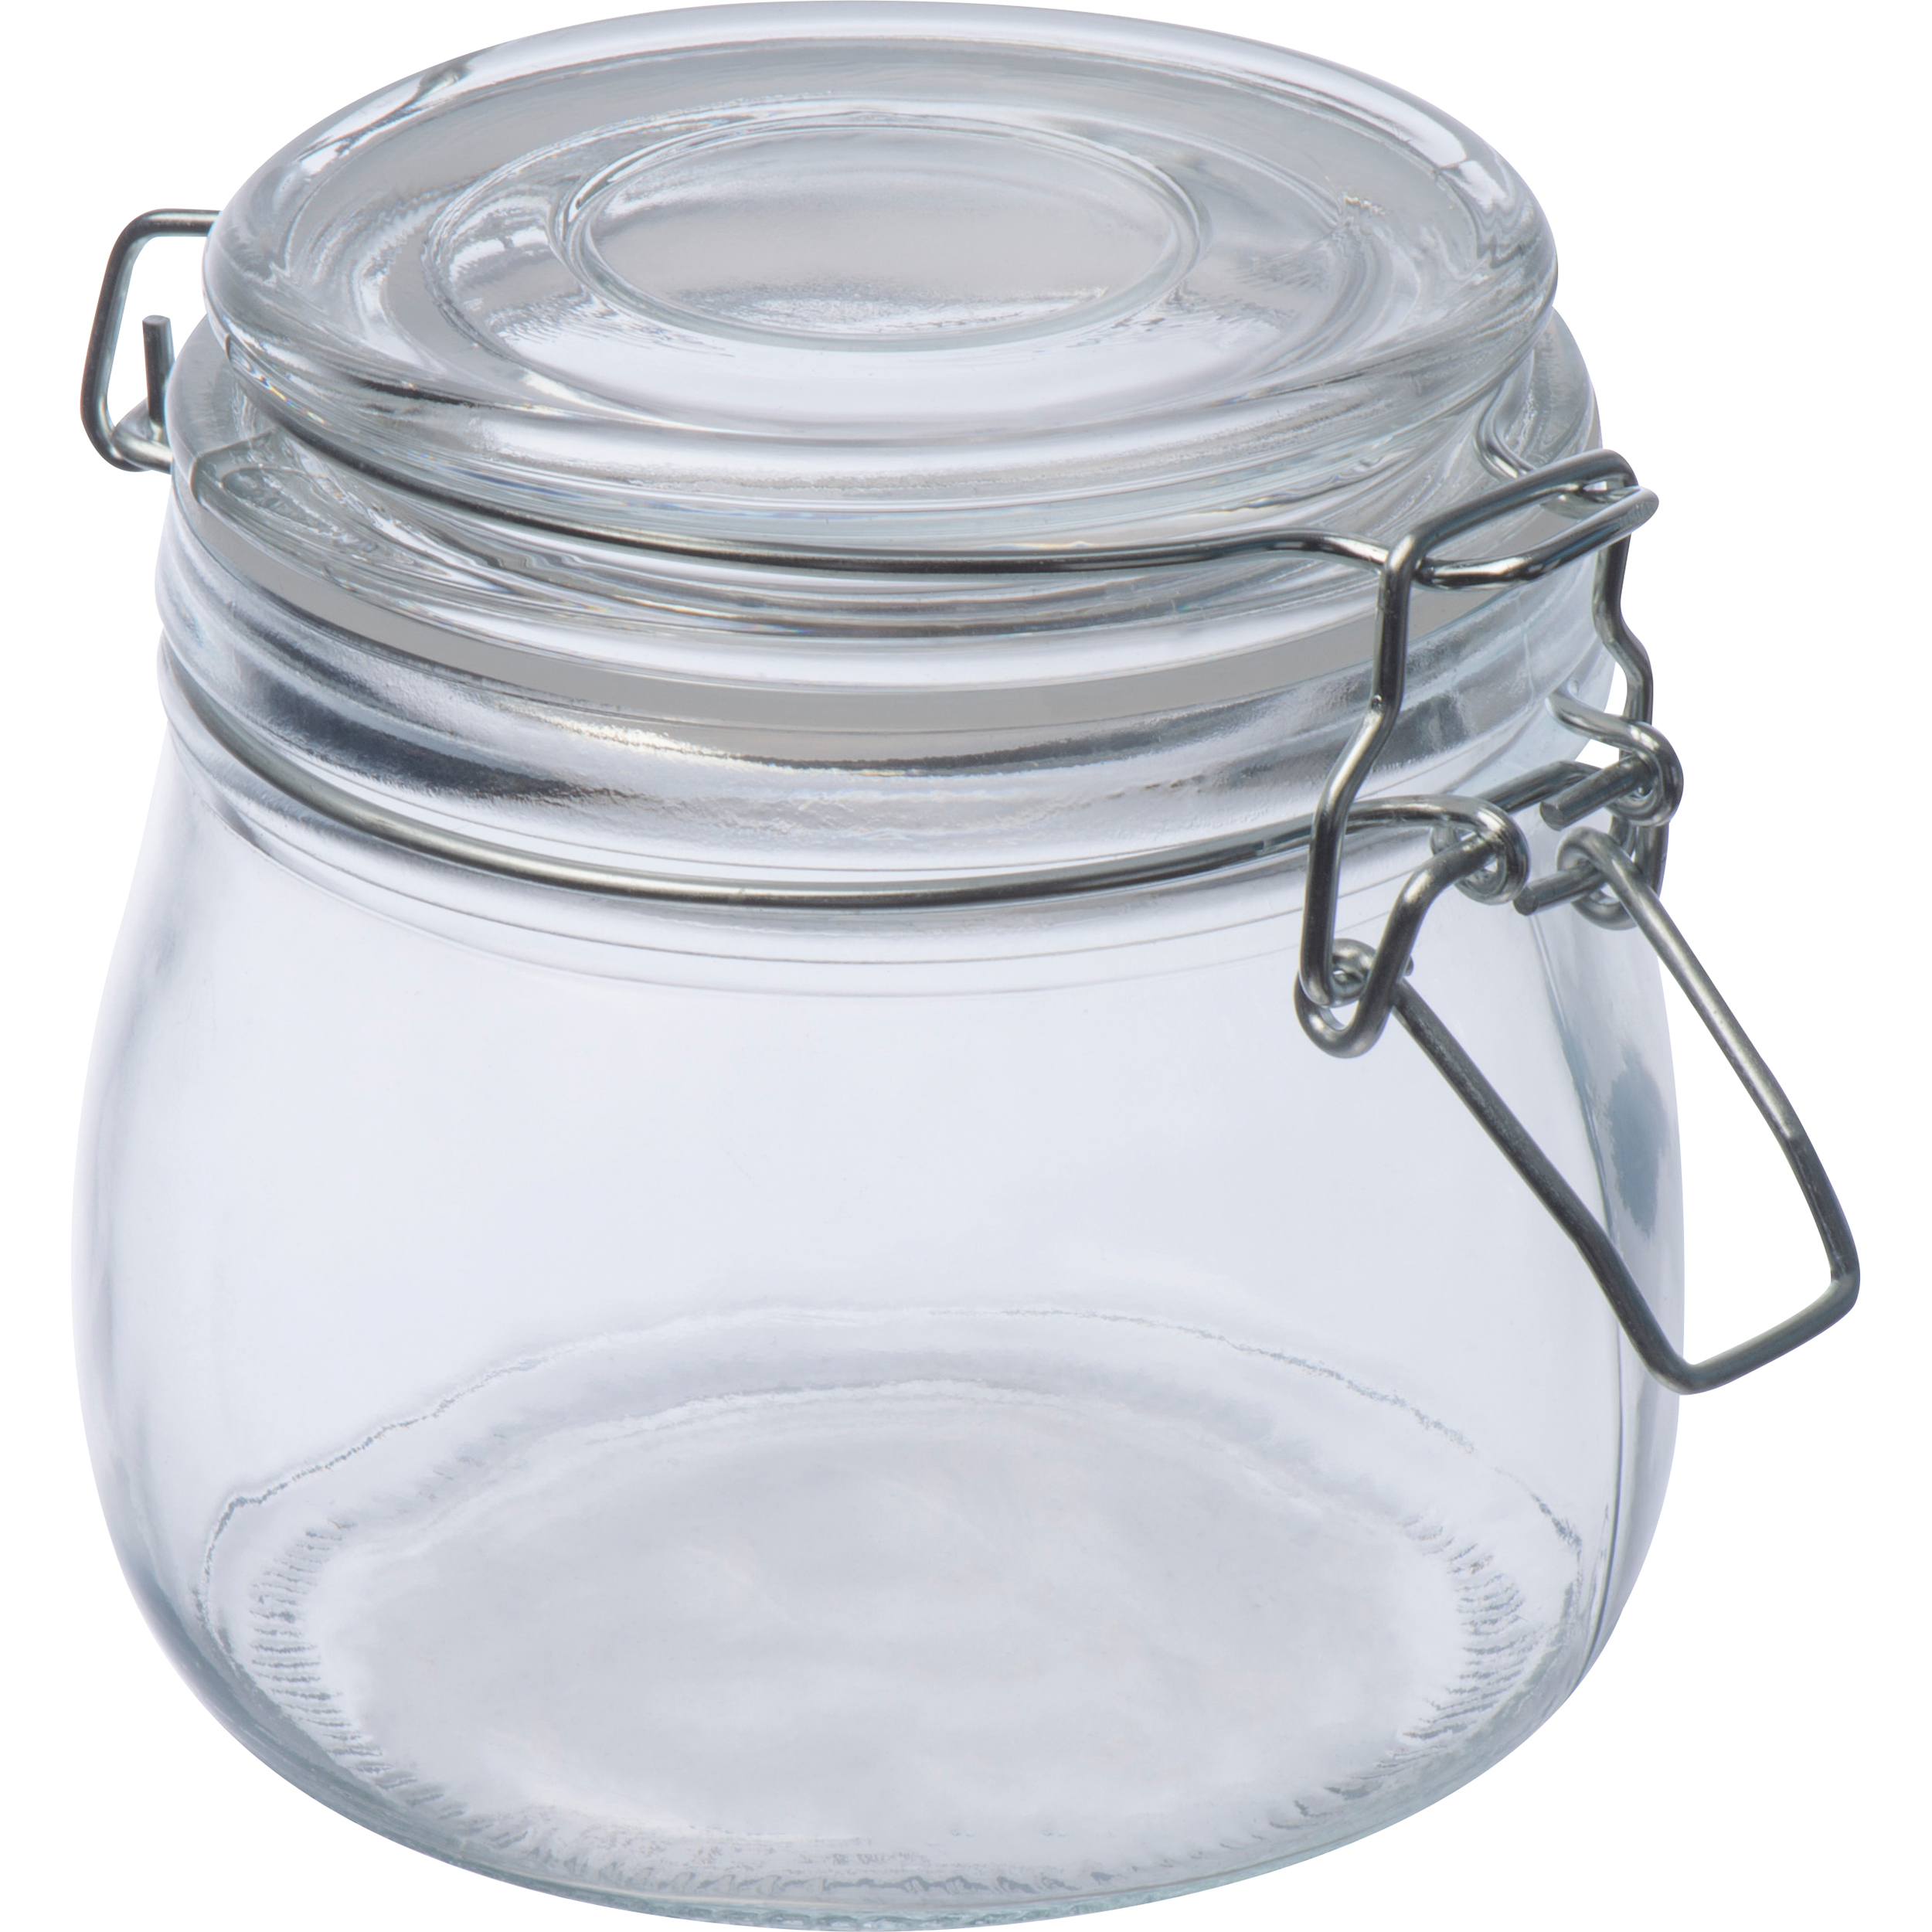 A glass jar that comes with a swing-top lid and a printed logo. - Lye Green